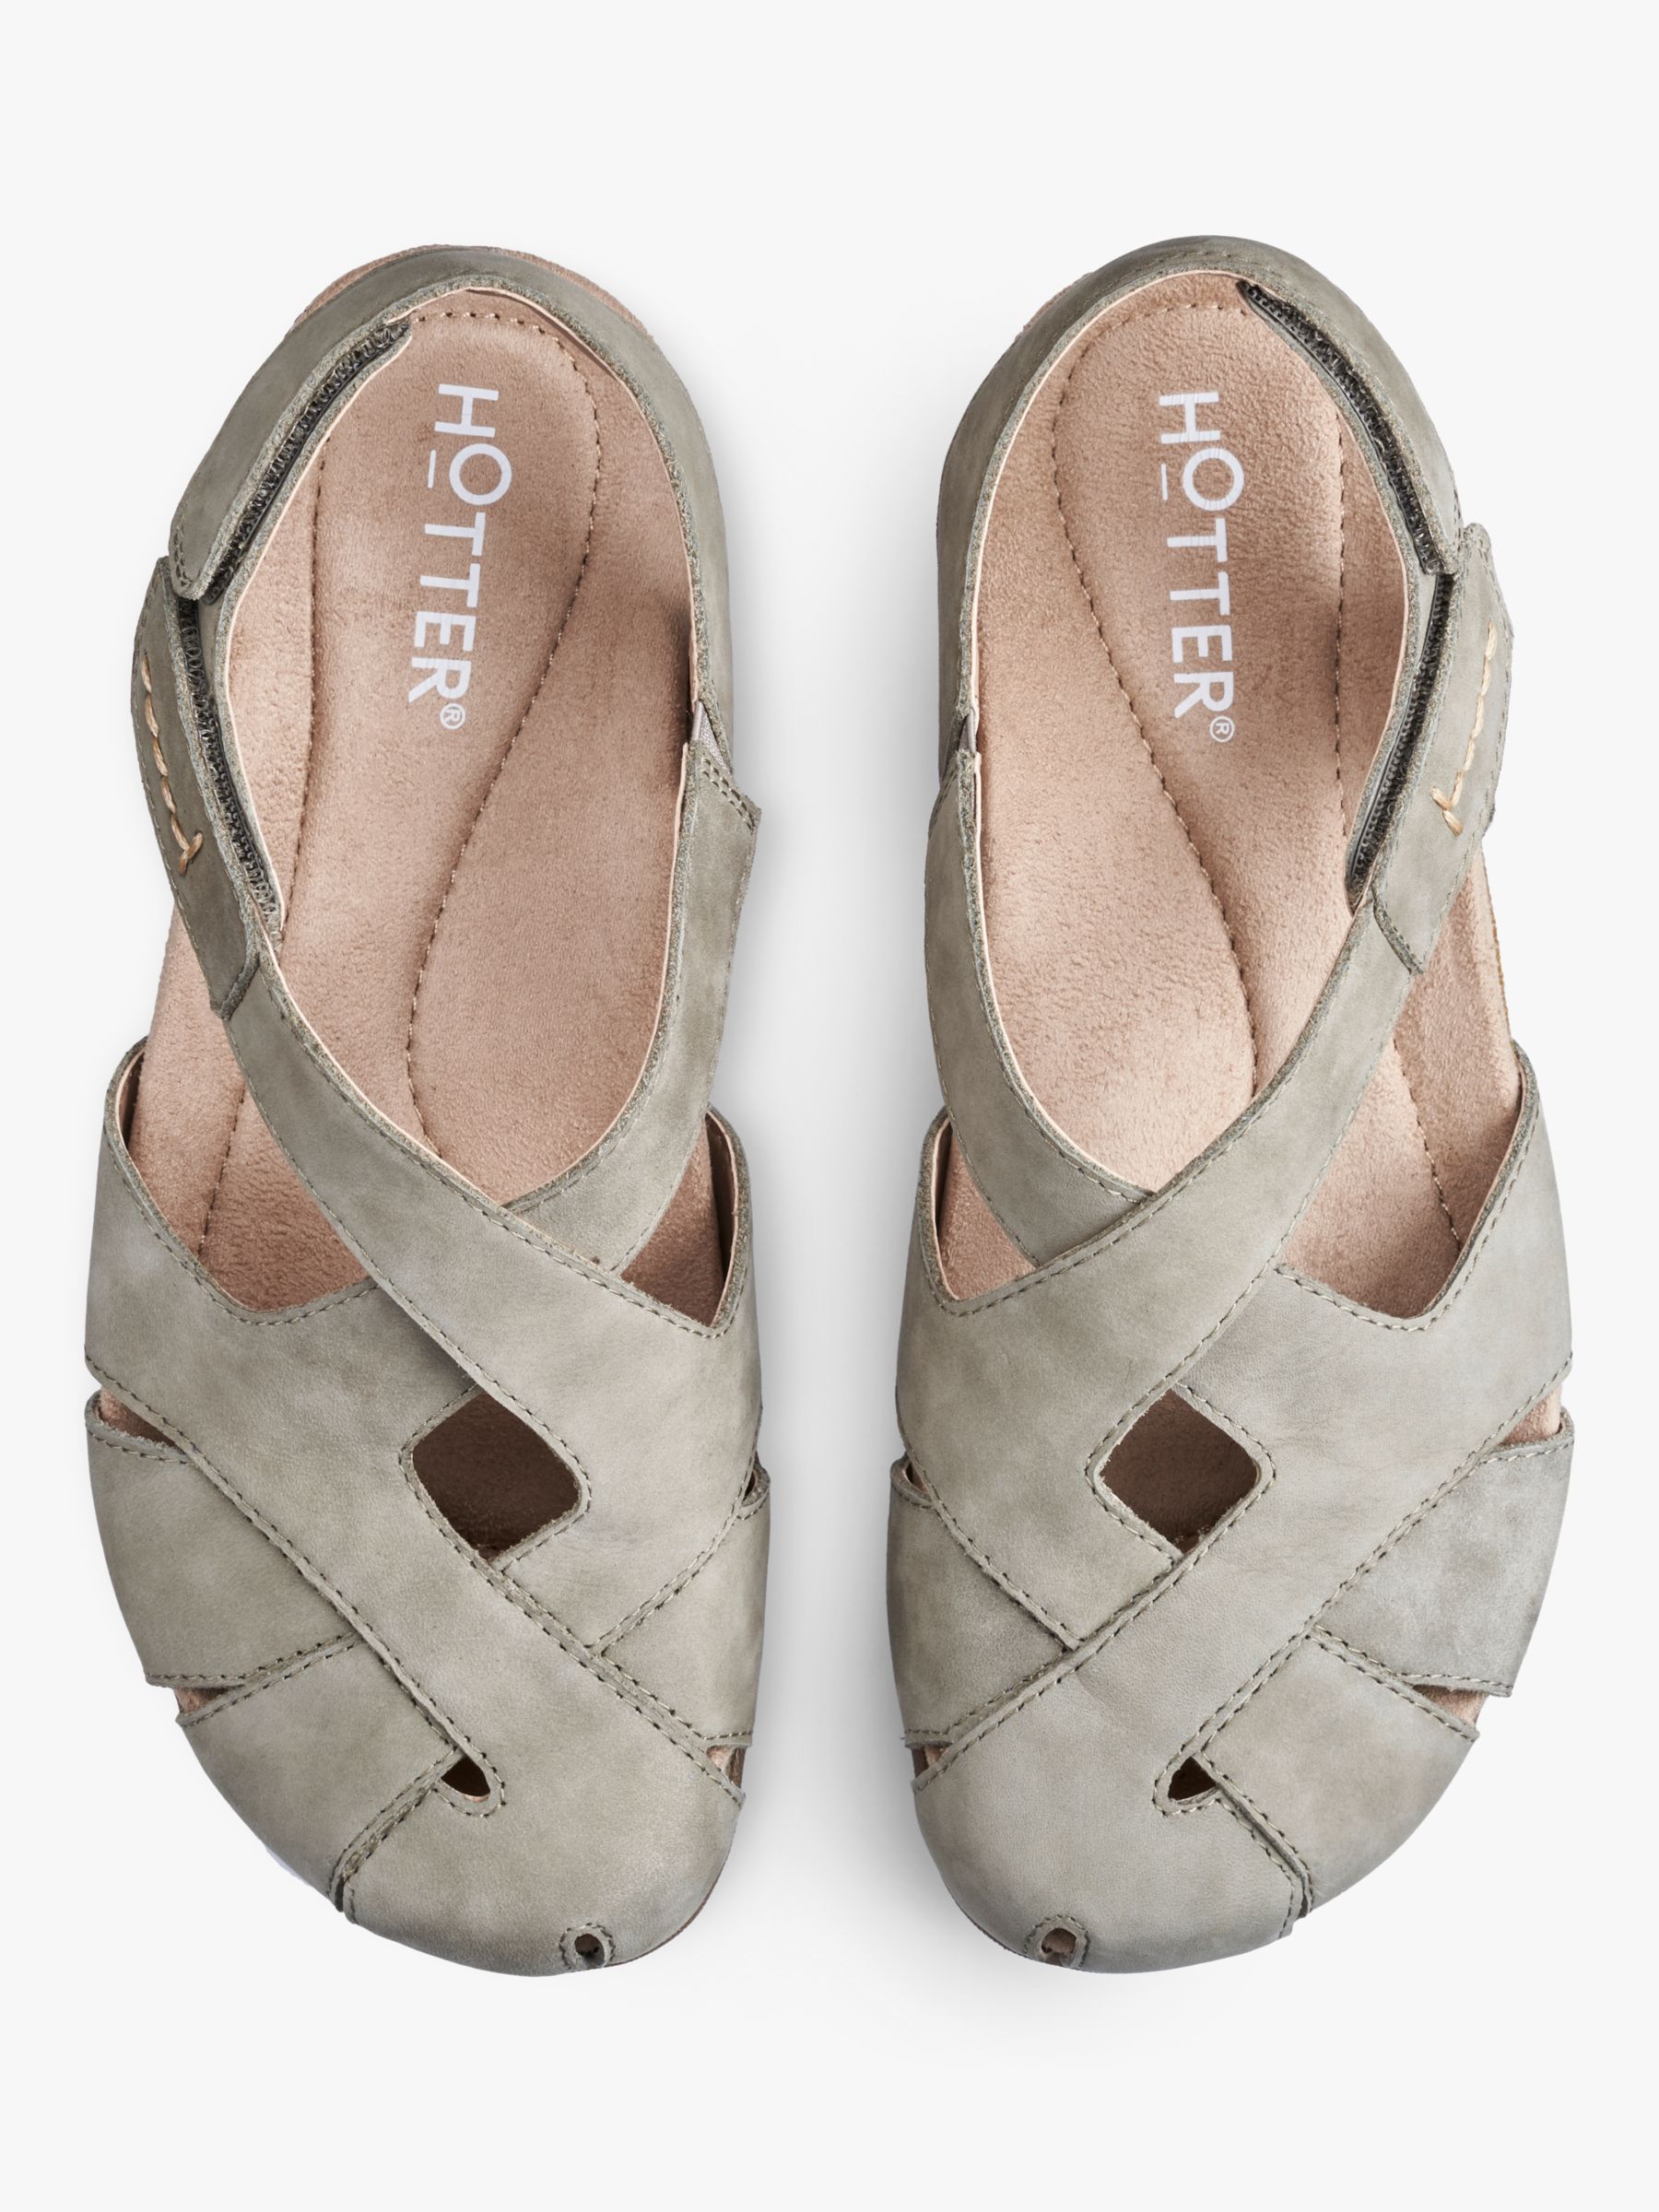 Buy Hotter Catskill II Closed Toe Sandals Online at johnlewis.com